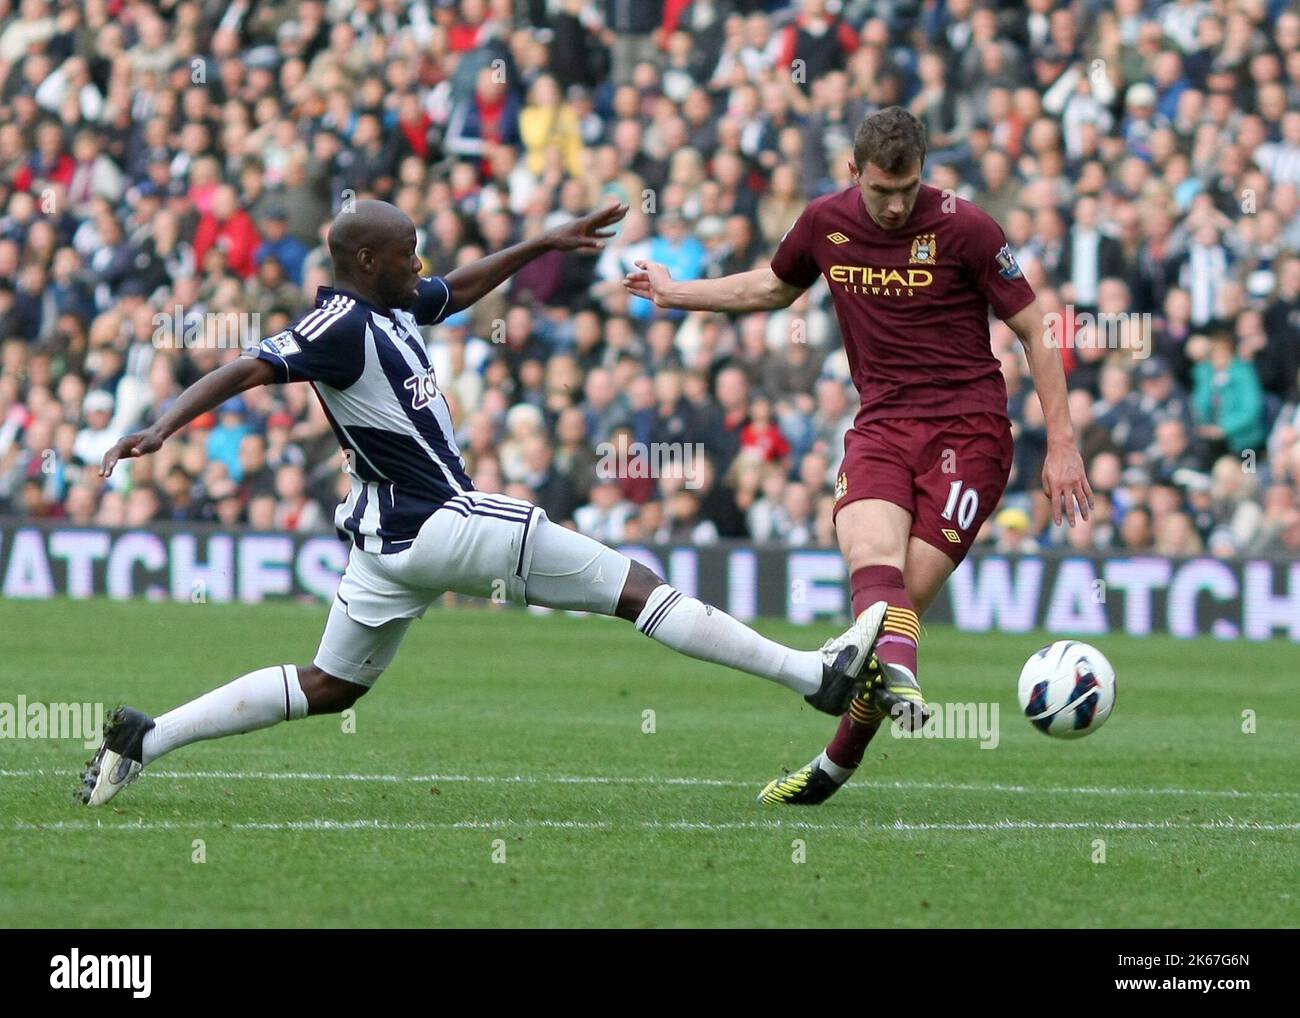 20th October 2012 - Barclays Premier League - West Bromwich Albion Vs. Manchester City - Edin Dzeko of Manchester City cooly slots home to win the match for Manchester City. (1-2) - Photo: Paul Roberts / Pathos. Stock Photo